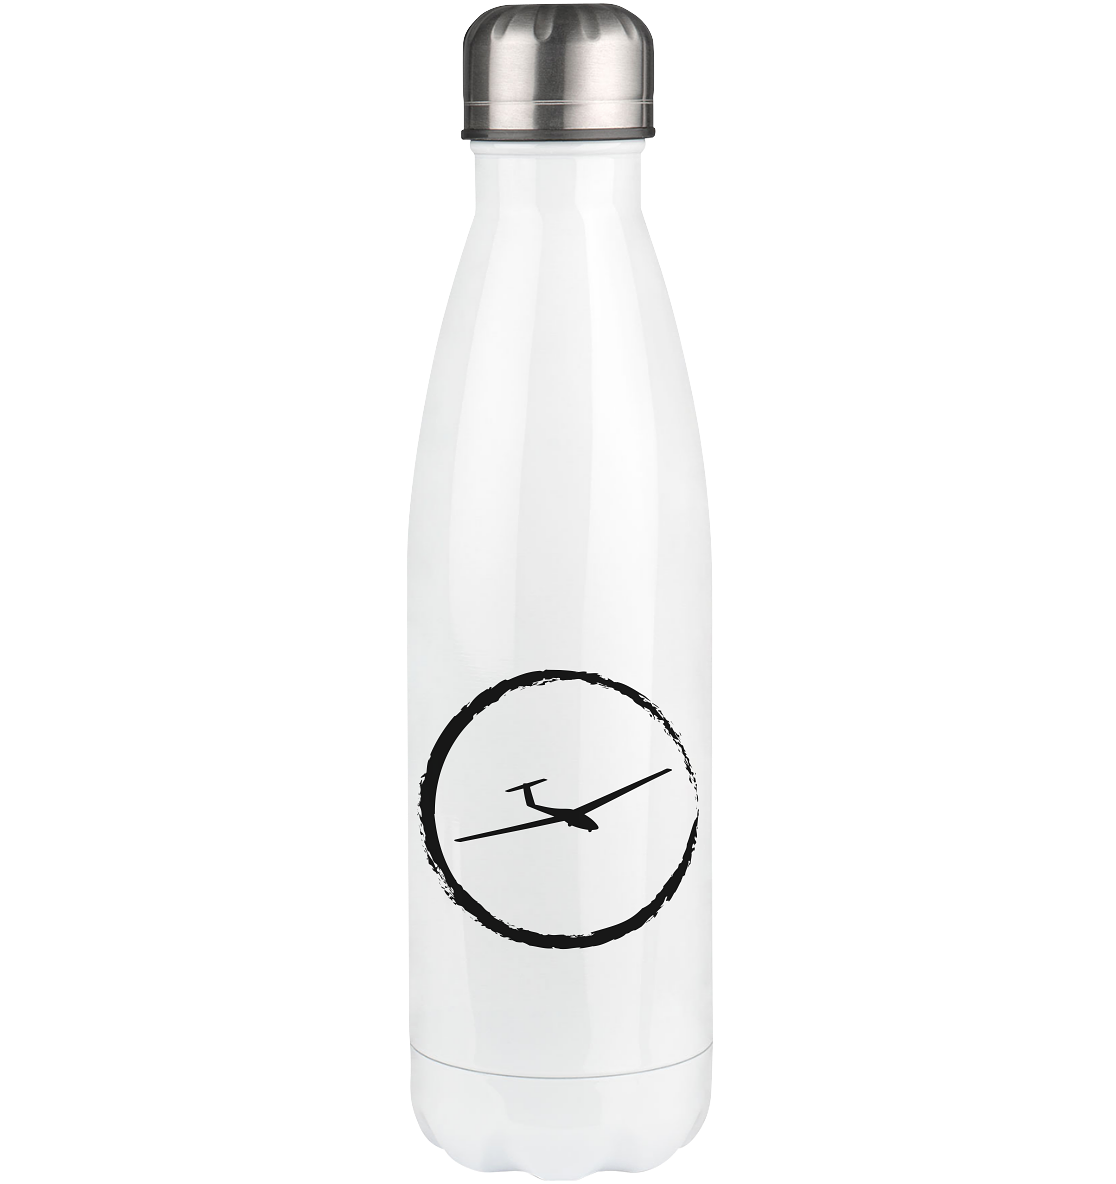 Cricle and Sailplane - Edelstahl Thermosflasche berge 500ml